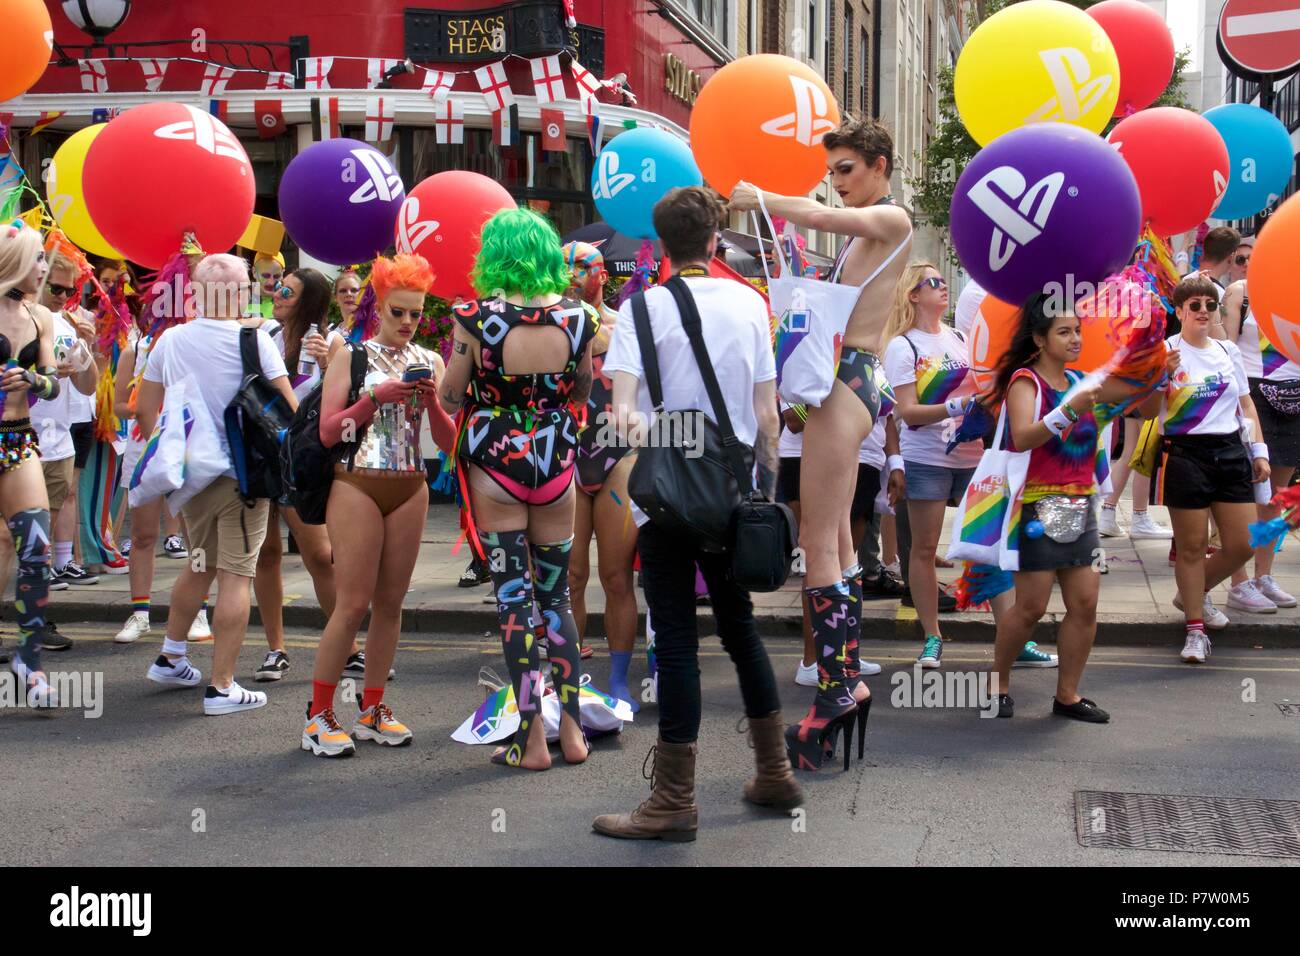 london-uk-7th-july-2018-employees-from-sony-playstation-preparing-for-the-pride-in-london-parade-2018-credit-dimple-patelalamy-live-news-P7W0M5.jpg